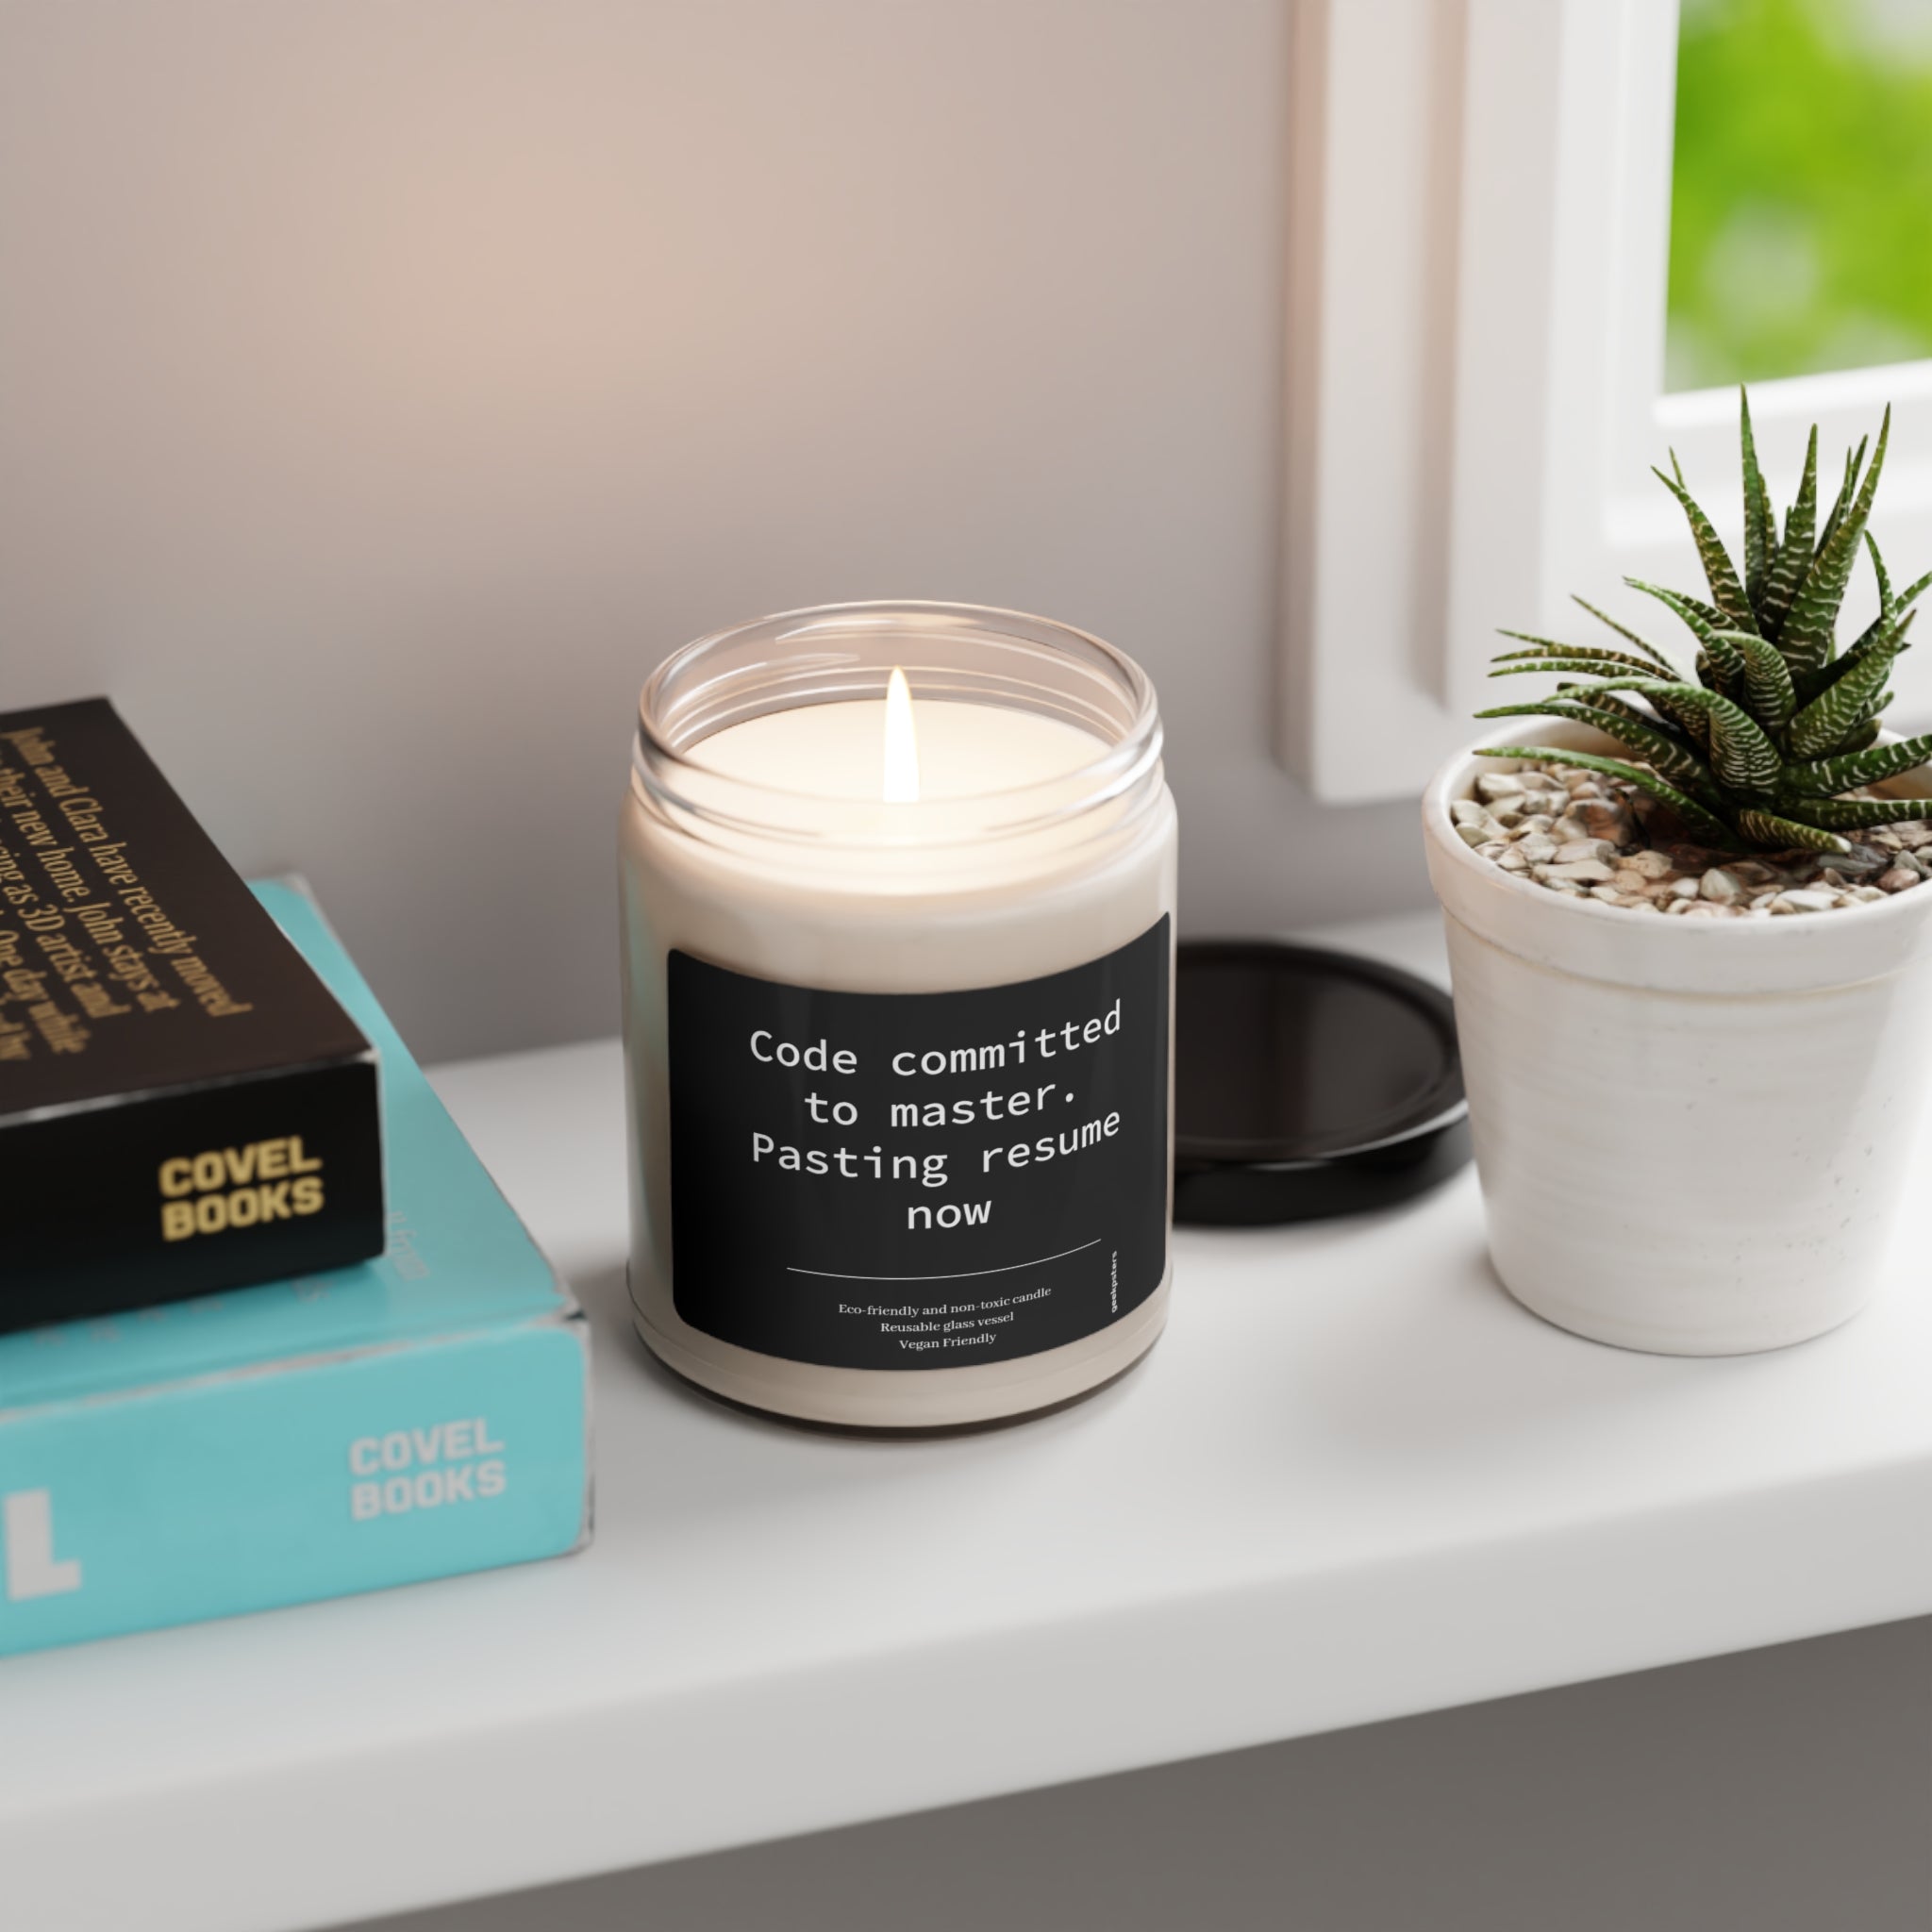 A Code Committed to Master scented soy wax blend candle with a humorous label next to a potted plant and stacked books on a windowsill.